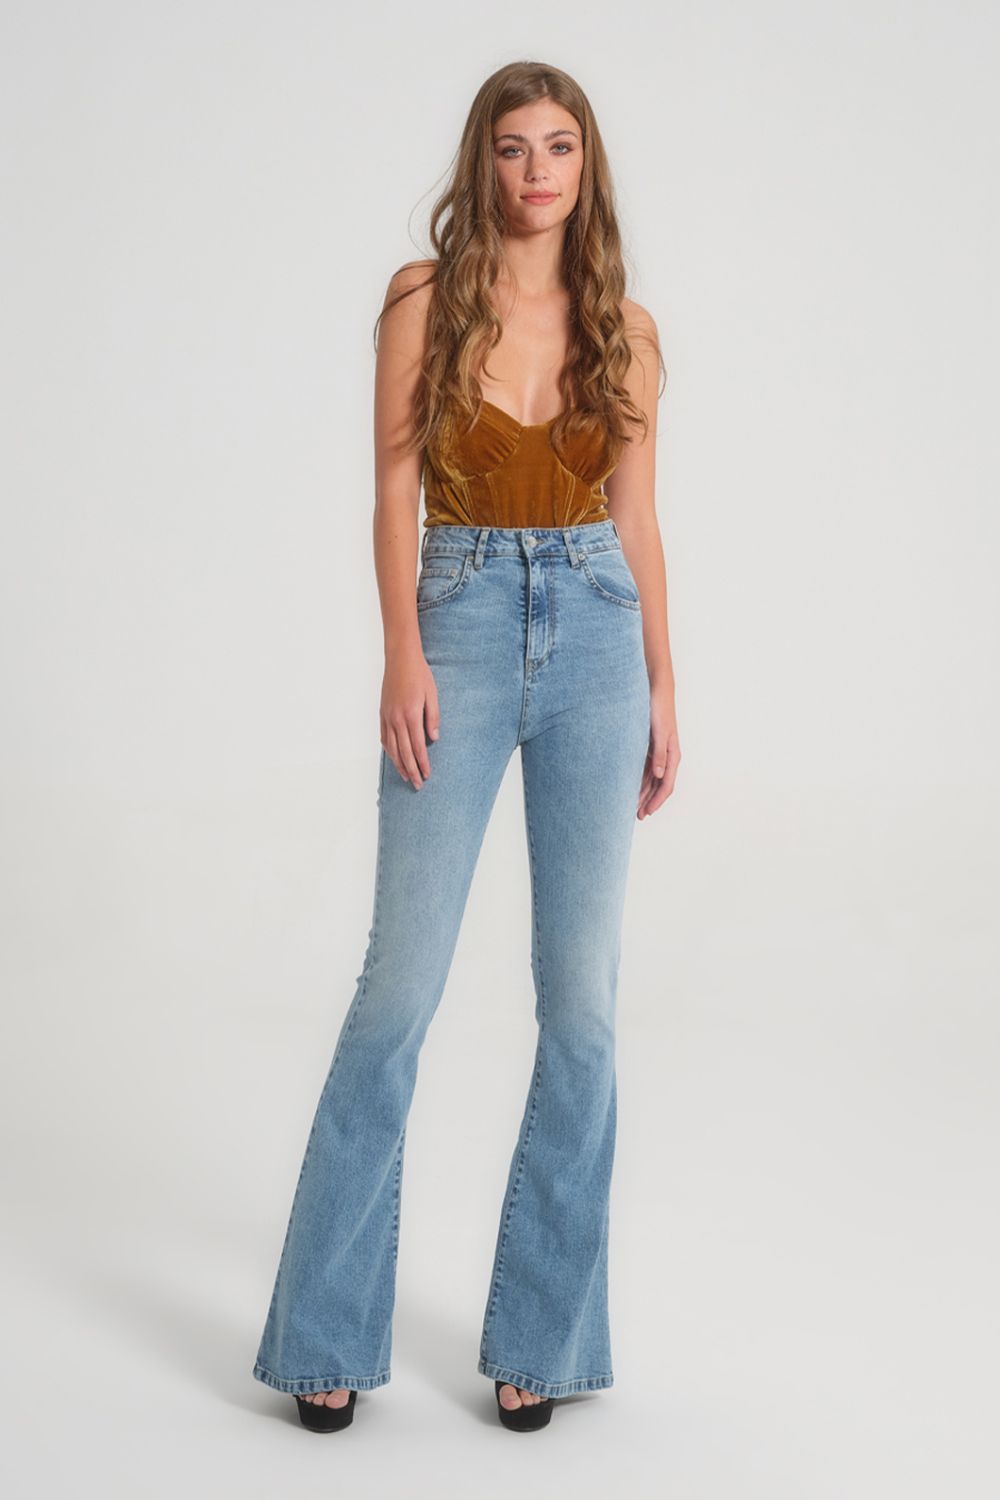 Flare Jeans Miley Super High Rise Sustainable Light Blue Stonewashed 